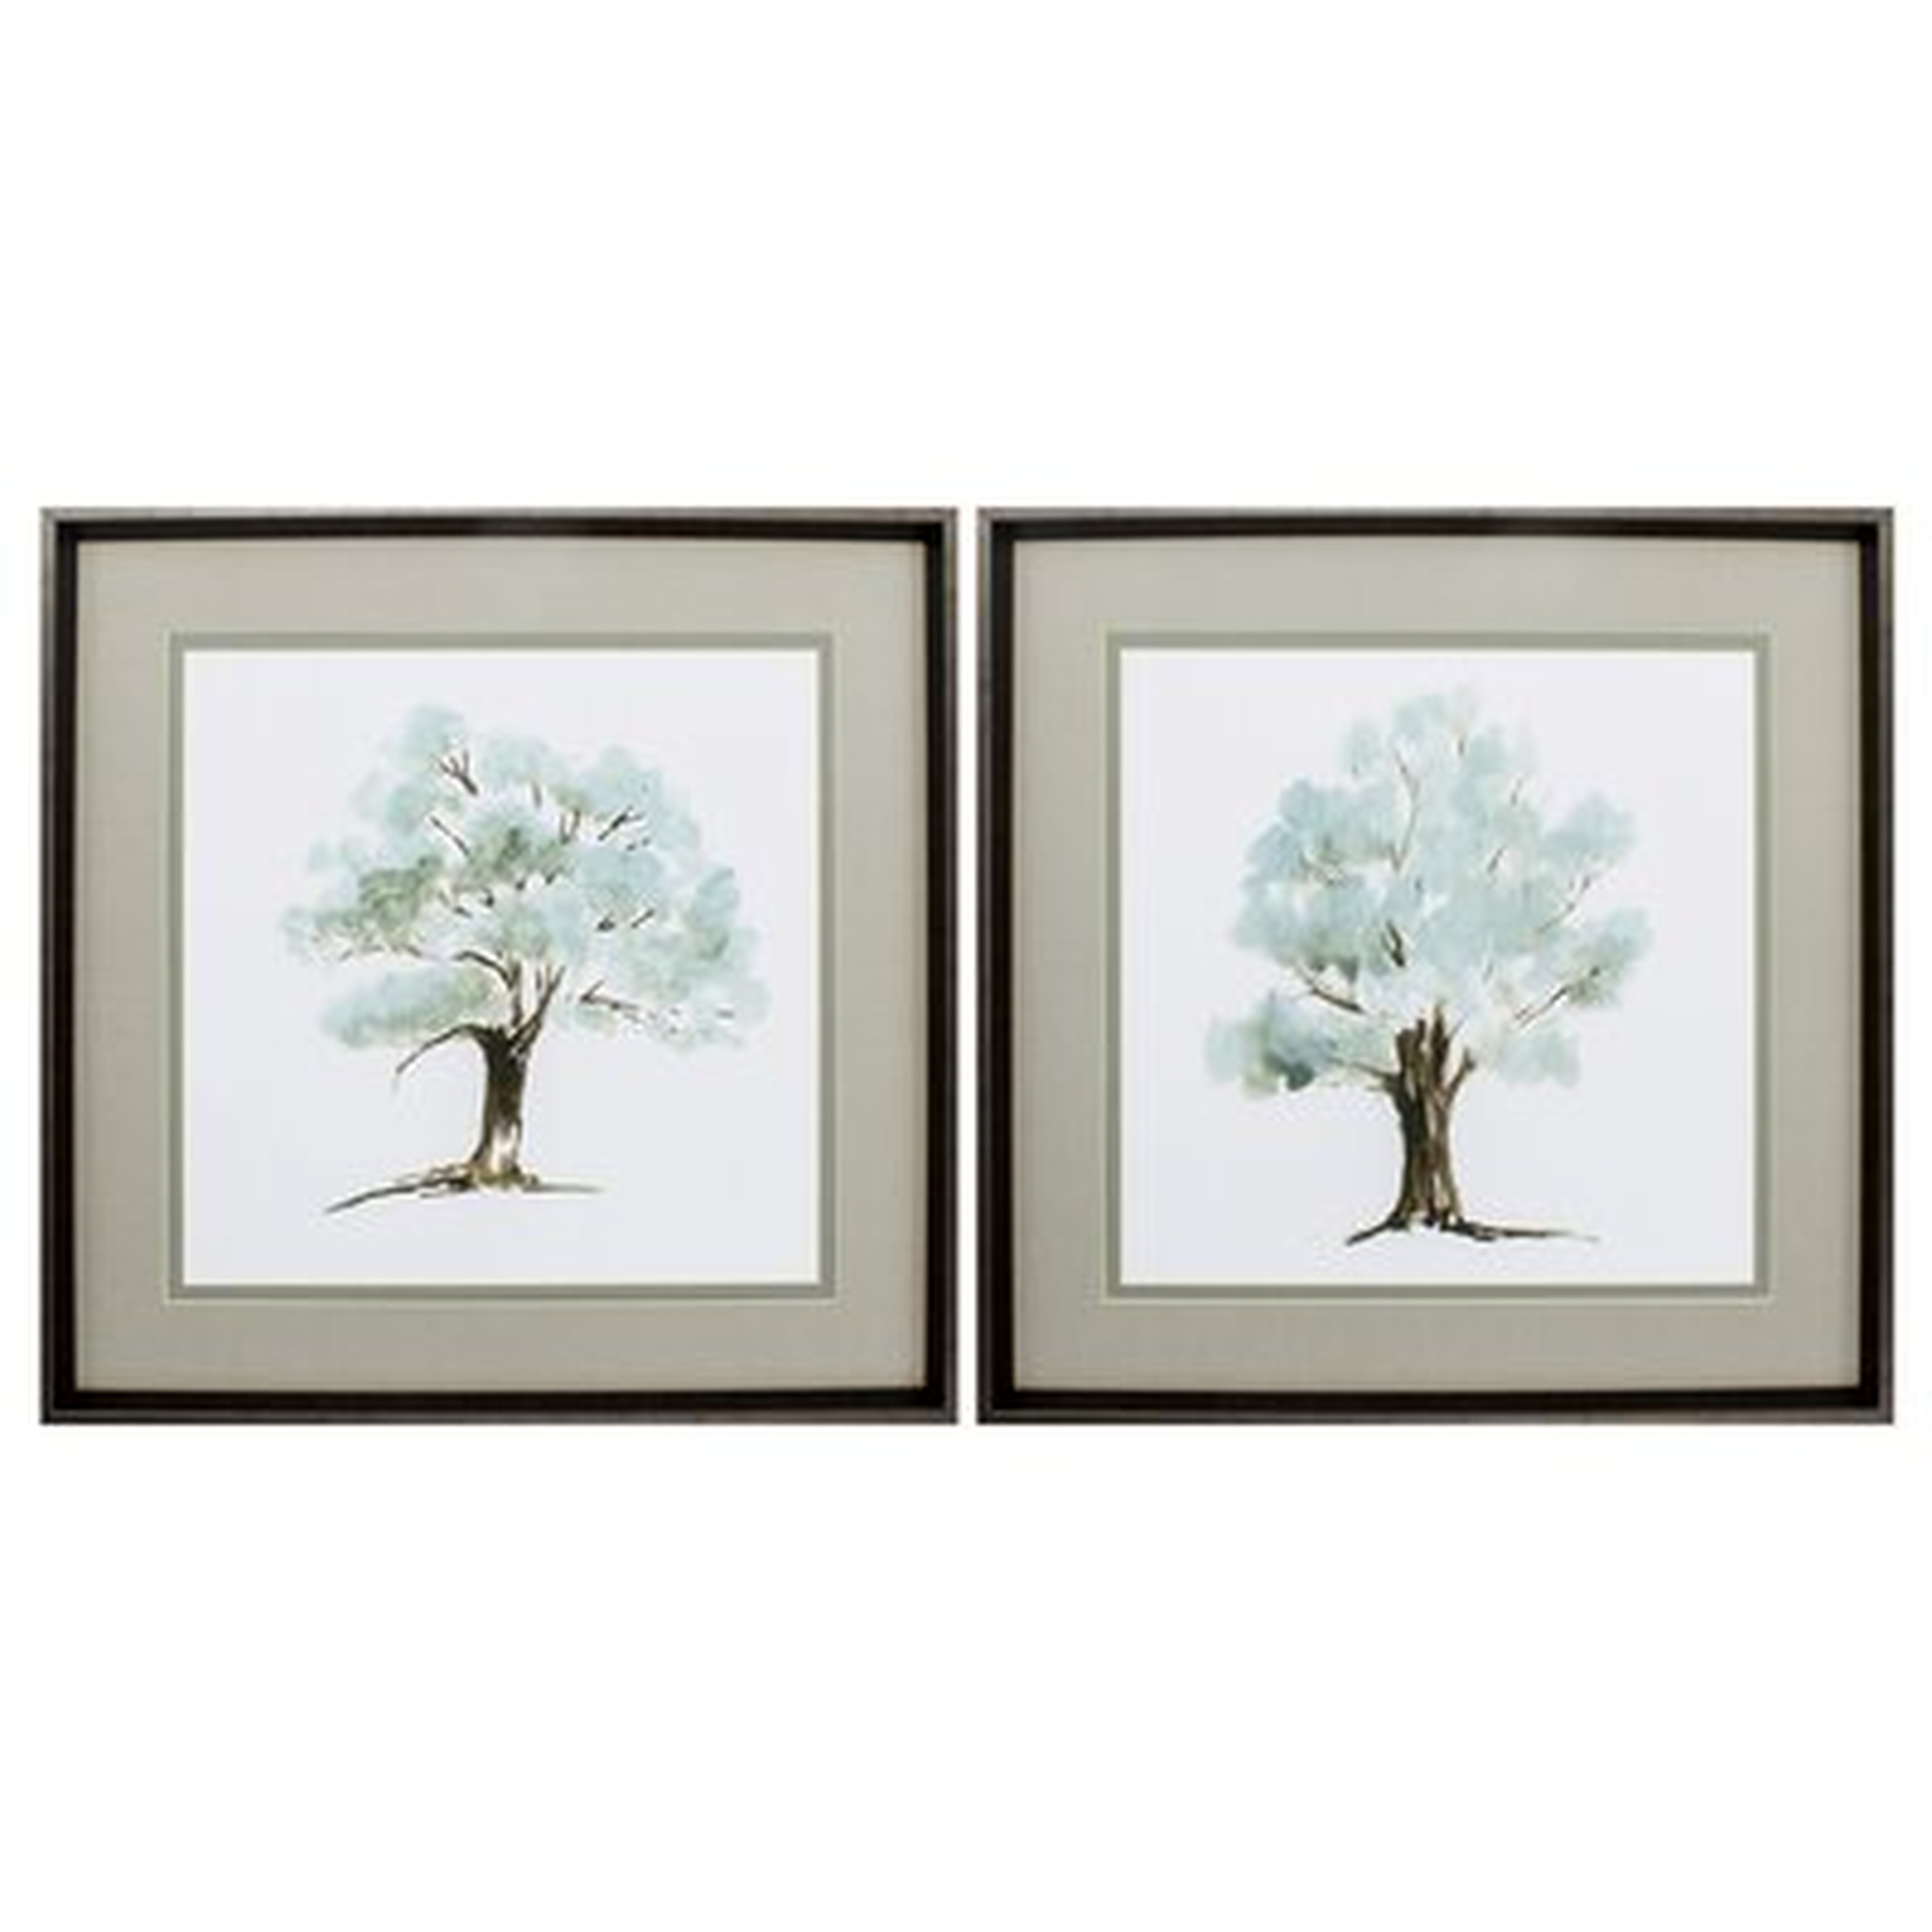 Mint Tree - 2 Piece Picture Frame Painting Print Set on Paper - Wayfair